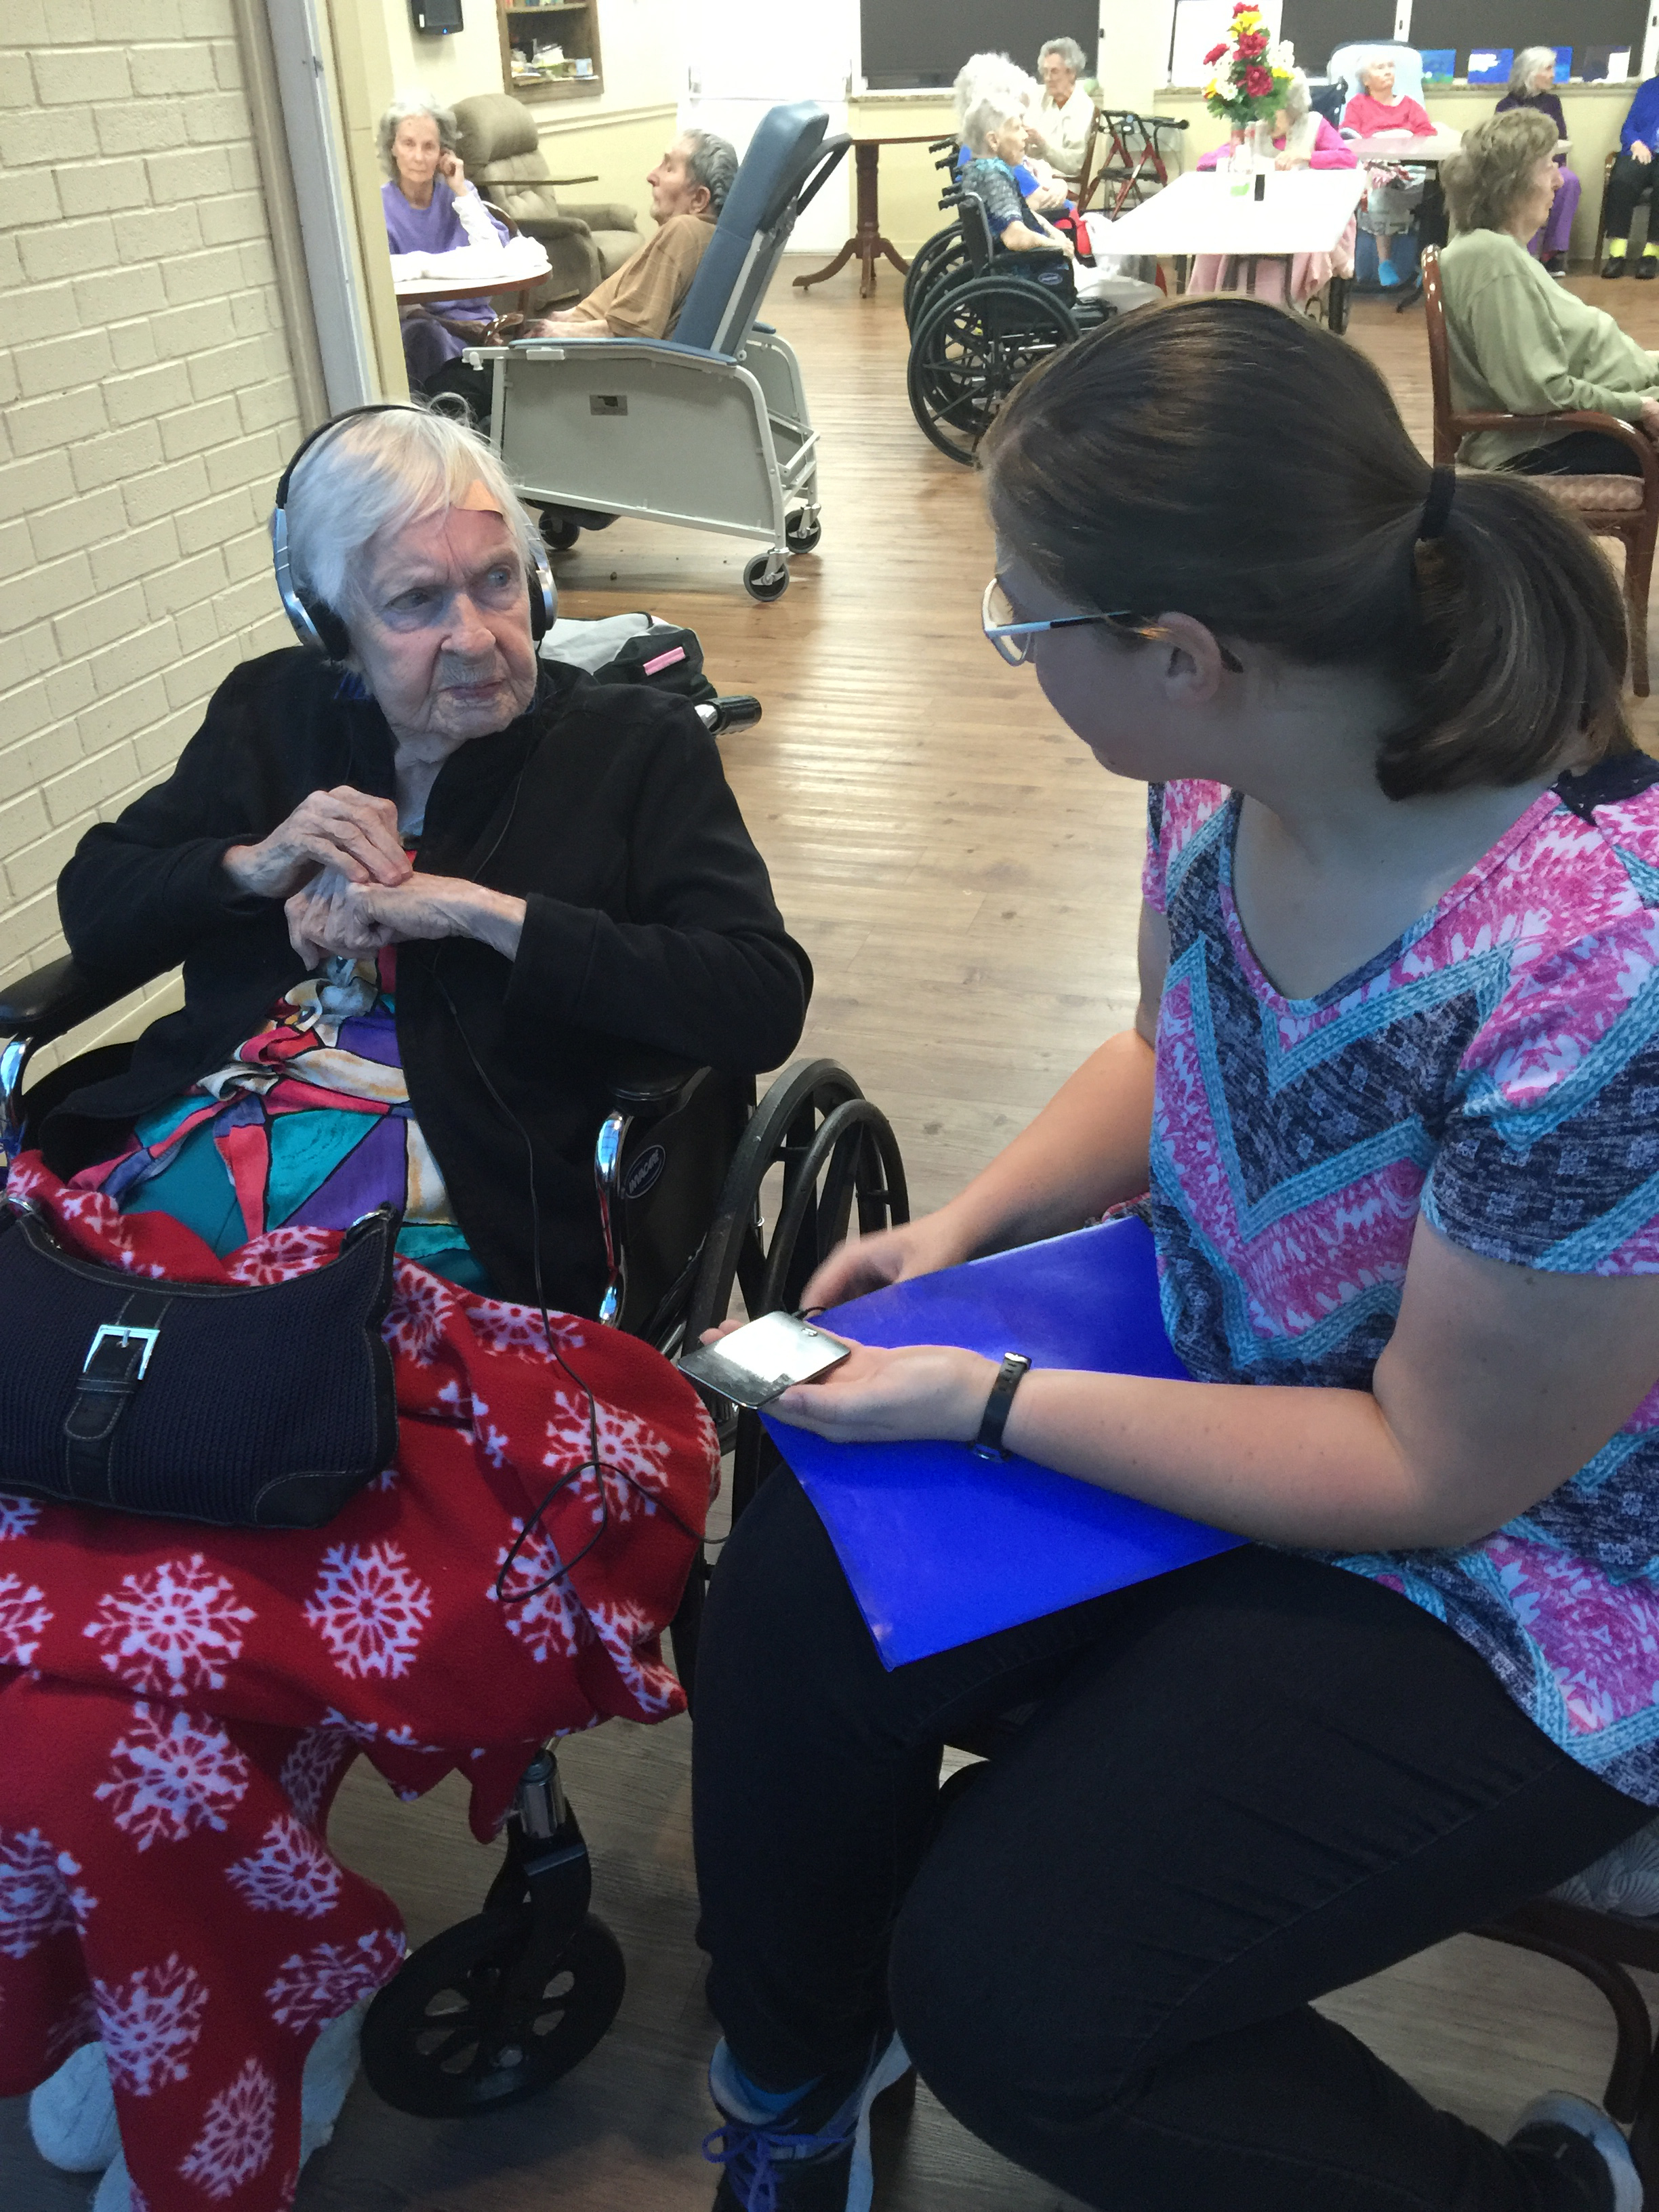 Music and Memory team member Jennifer Watson talking with one of the residents who is seated in a wheelchair.